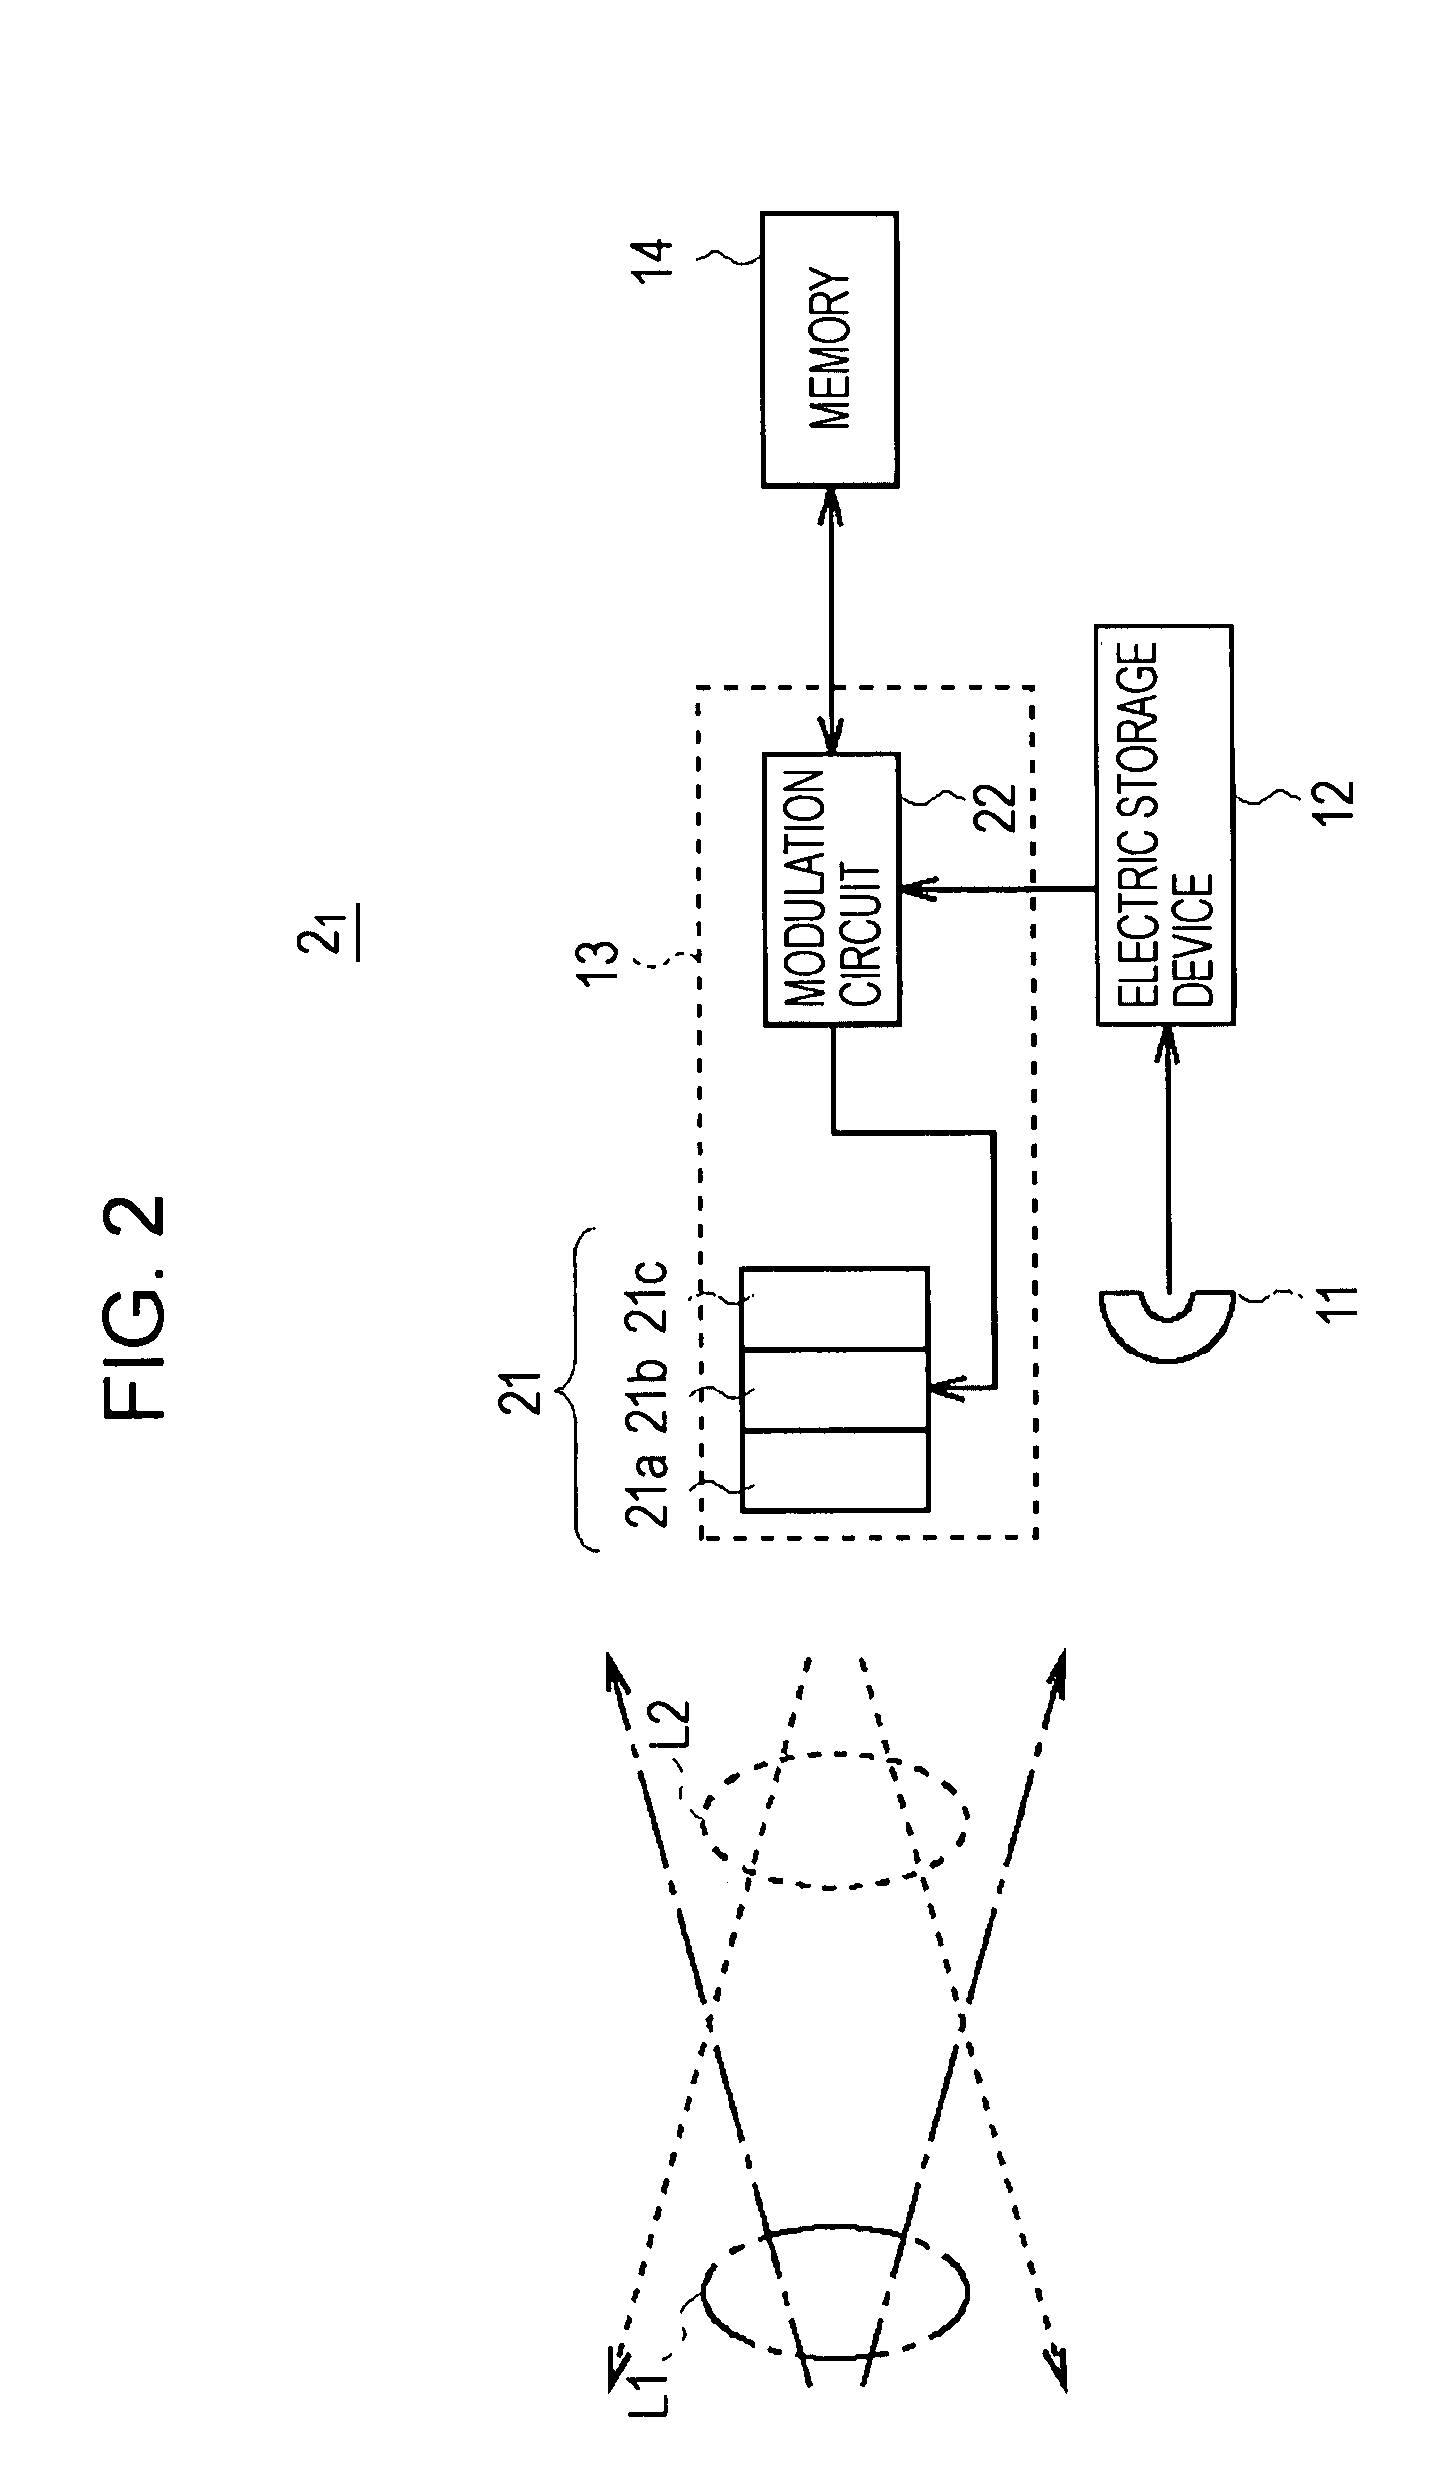 Optical communication system, optical reader, and method of reading information